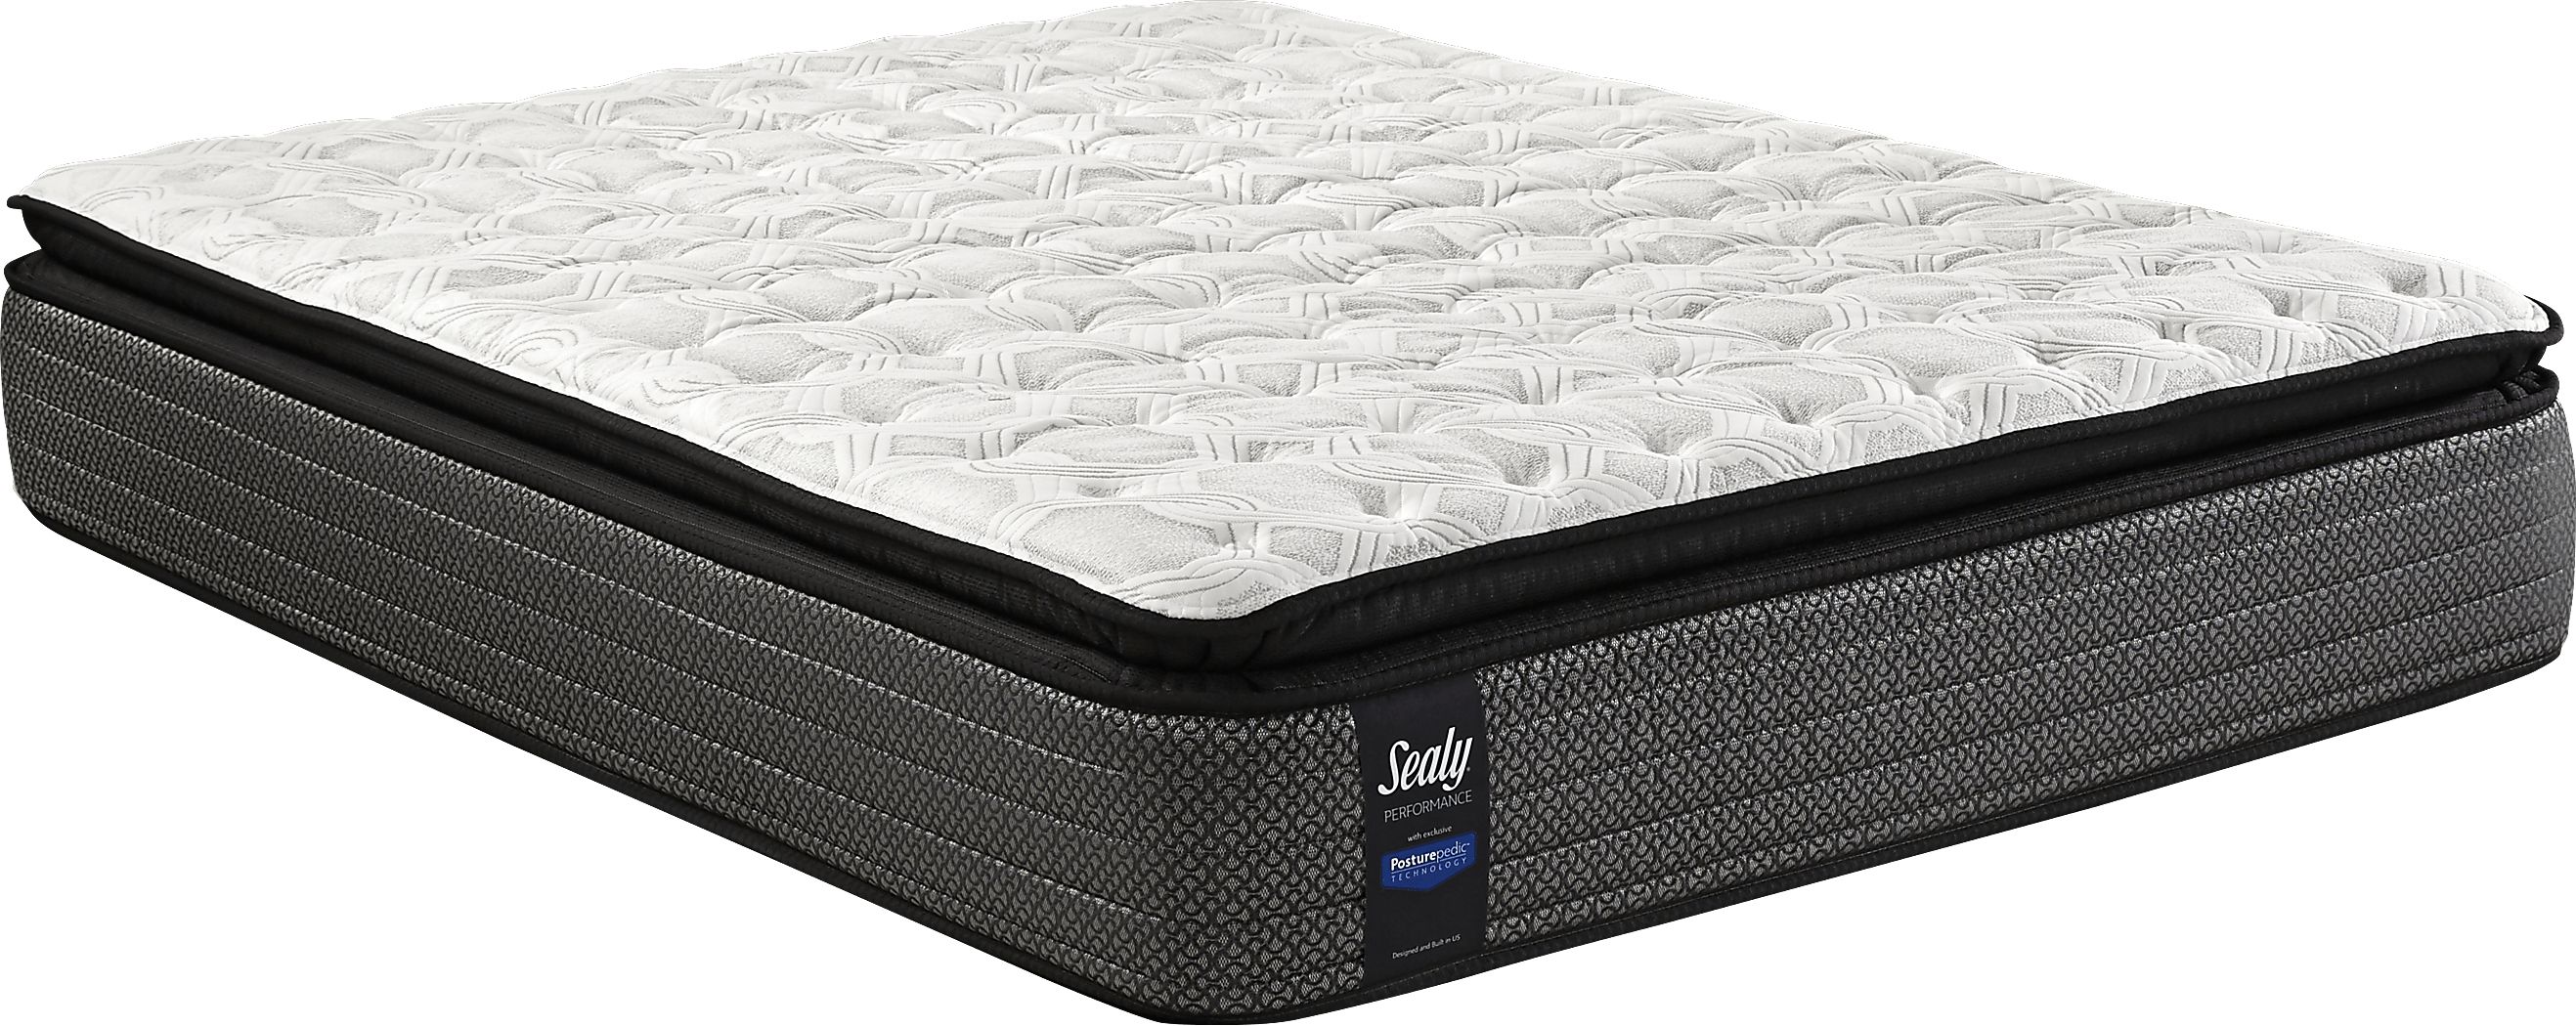 sealy performance hanover street firm mattress review